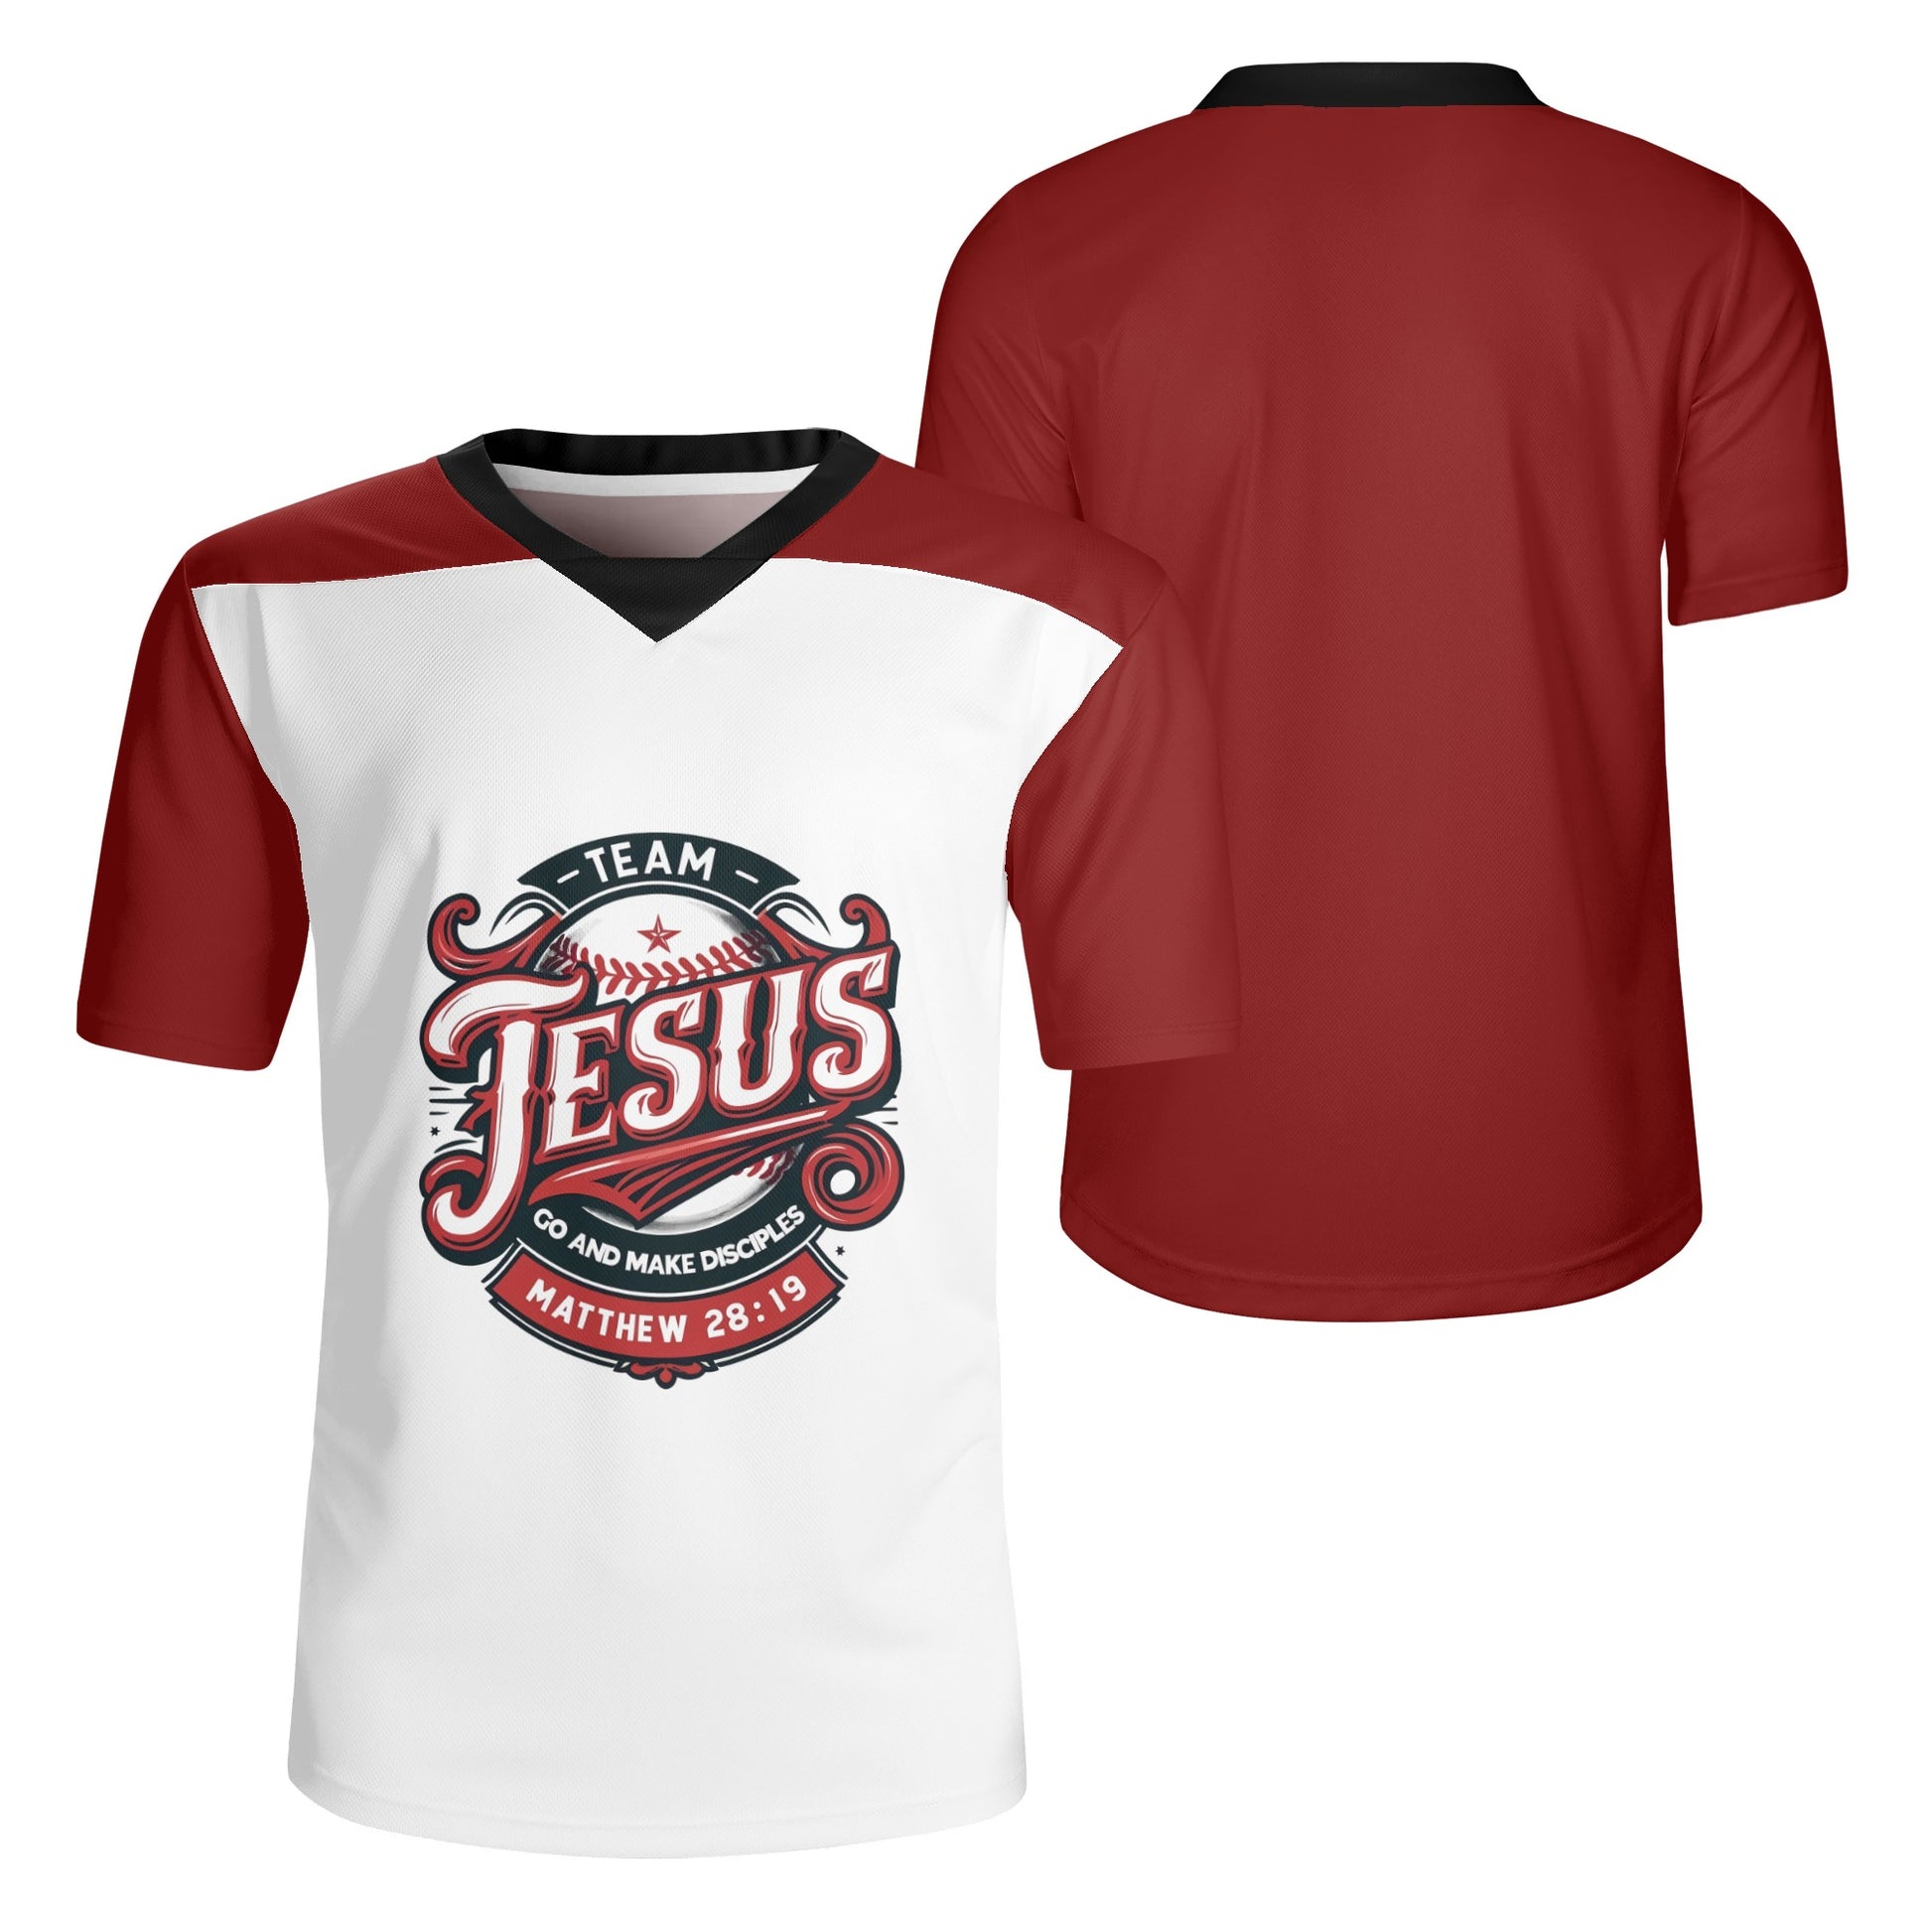 Team Jesus Go And Make Disciples Mens Christian Jersey popcustoms